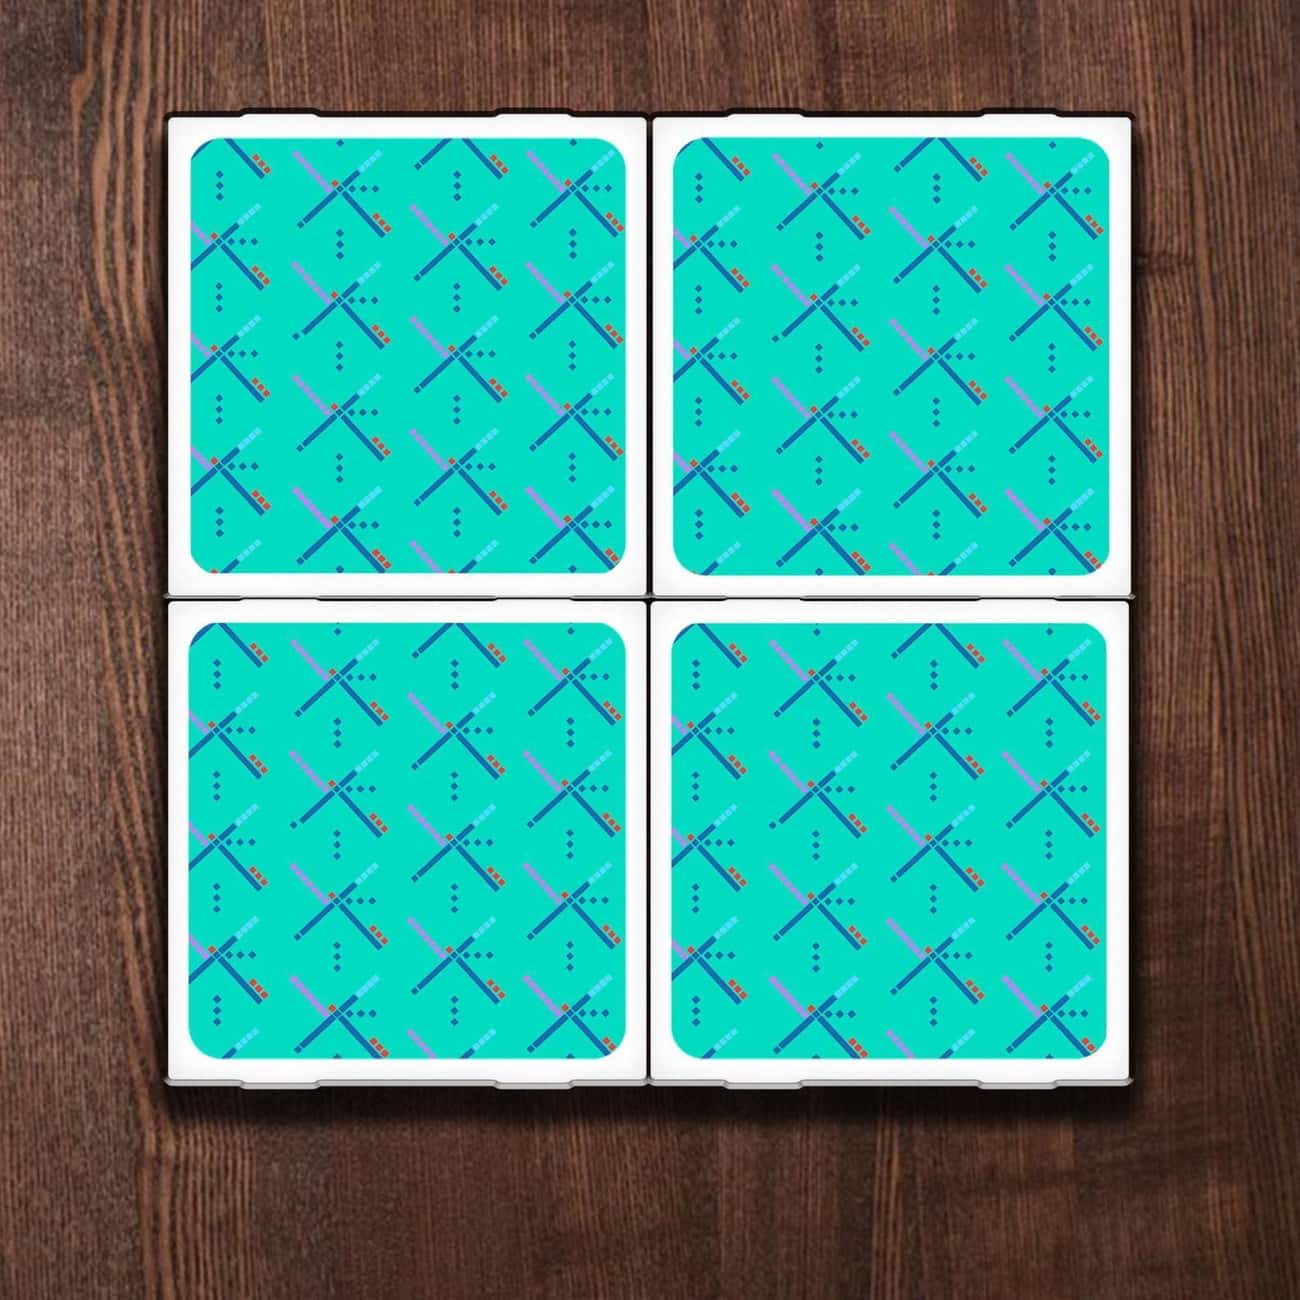 These PDX Coasters For Your Craft Beer